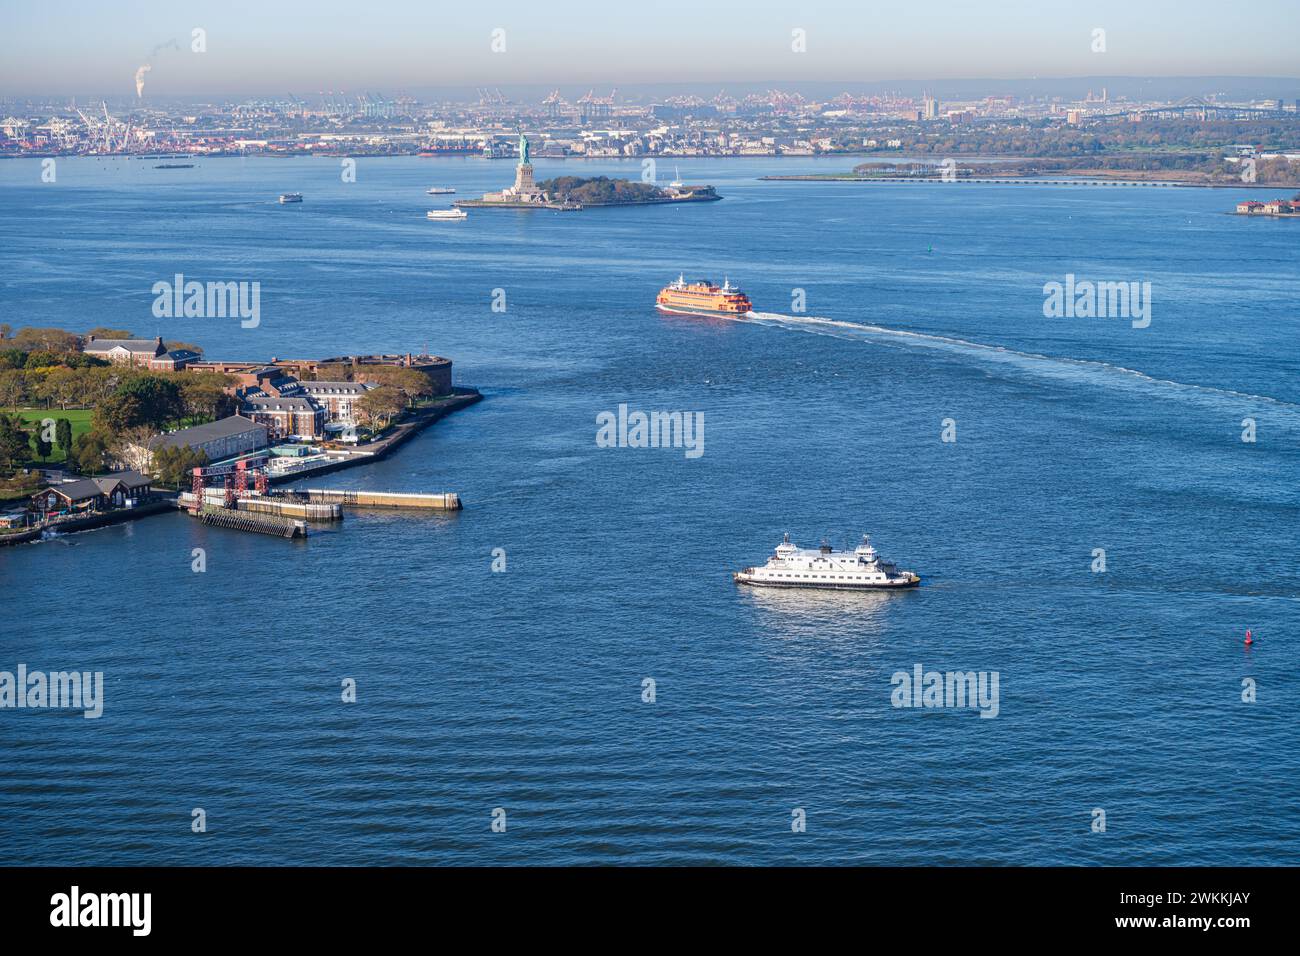 Upper New York Bay is a popular destination for boat trips to Governors Island and the Statue of Liberty. Stock Photo